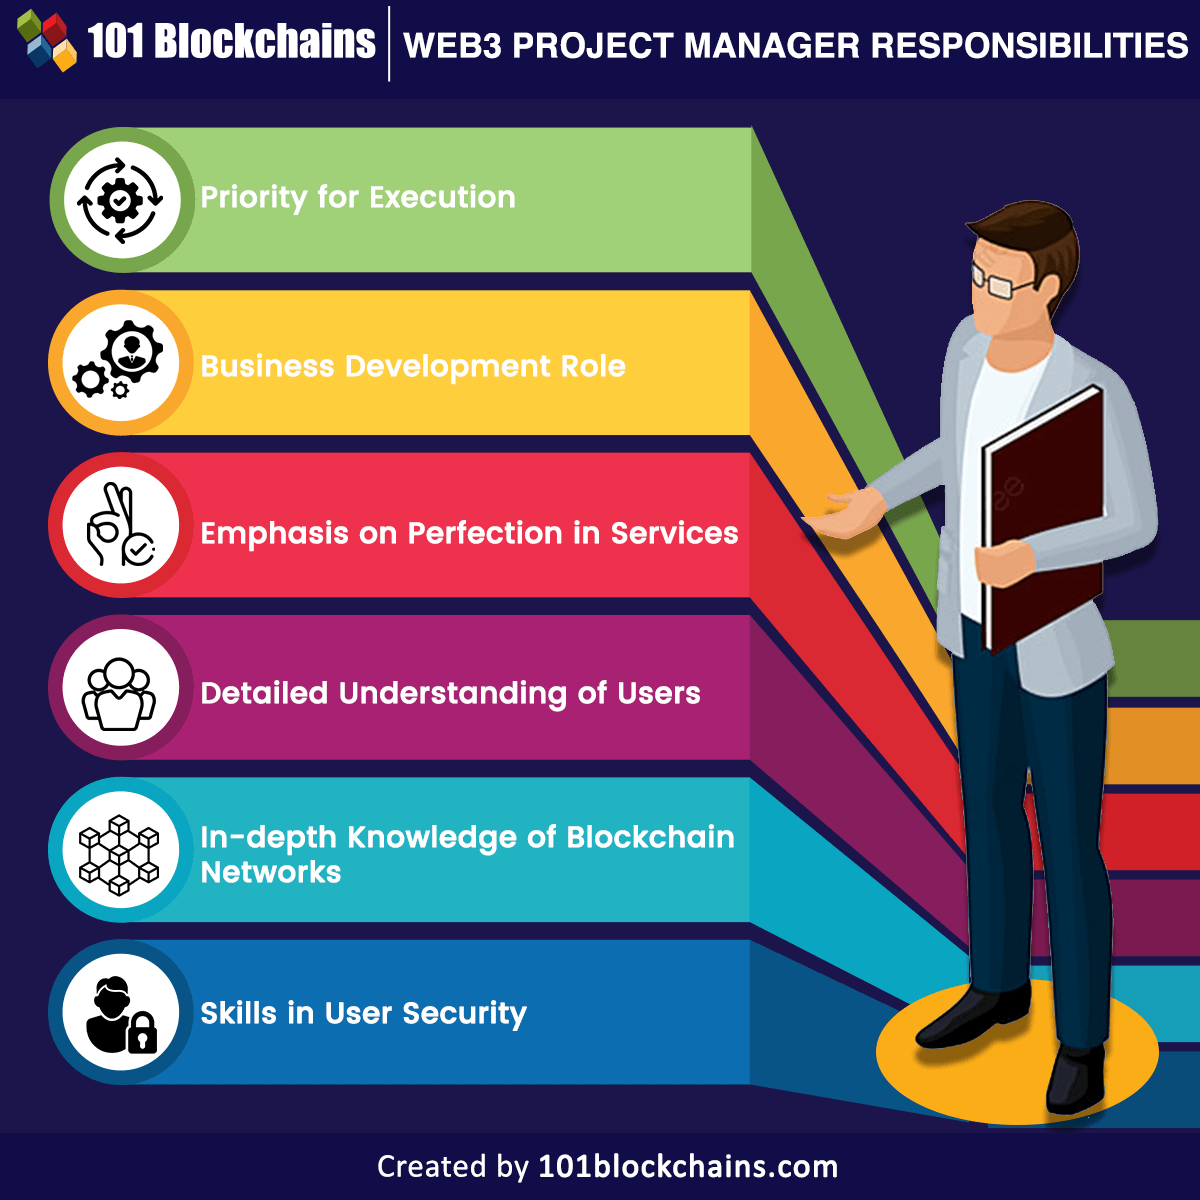 Web3 project manager responsibilities